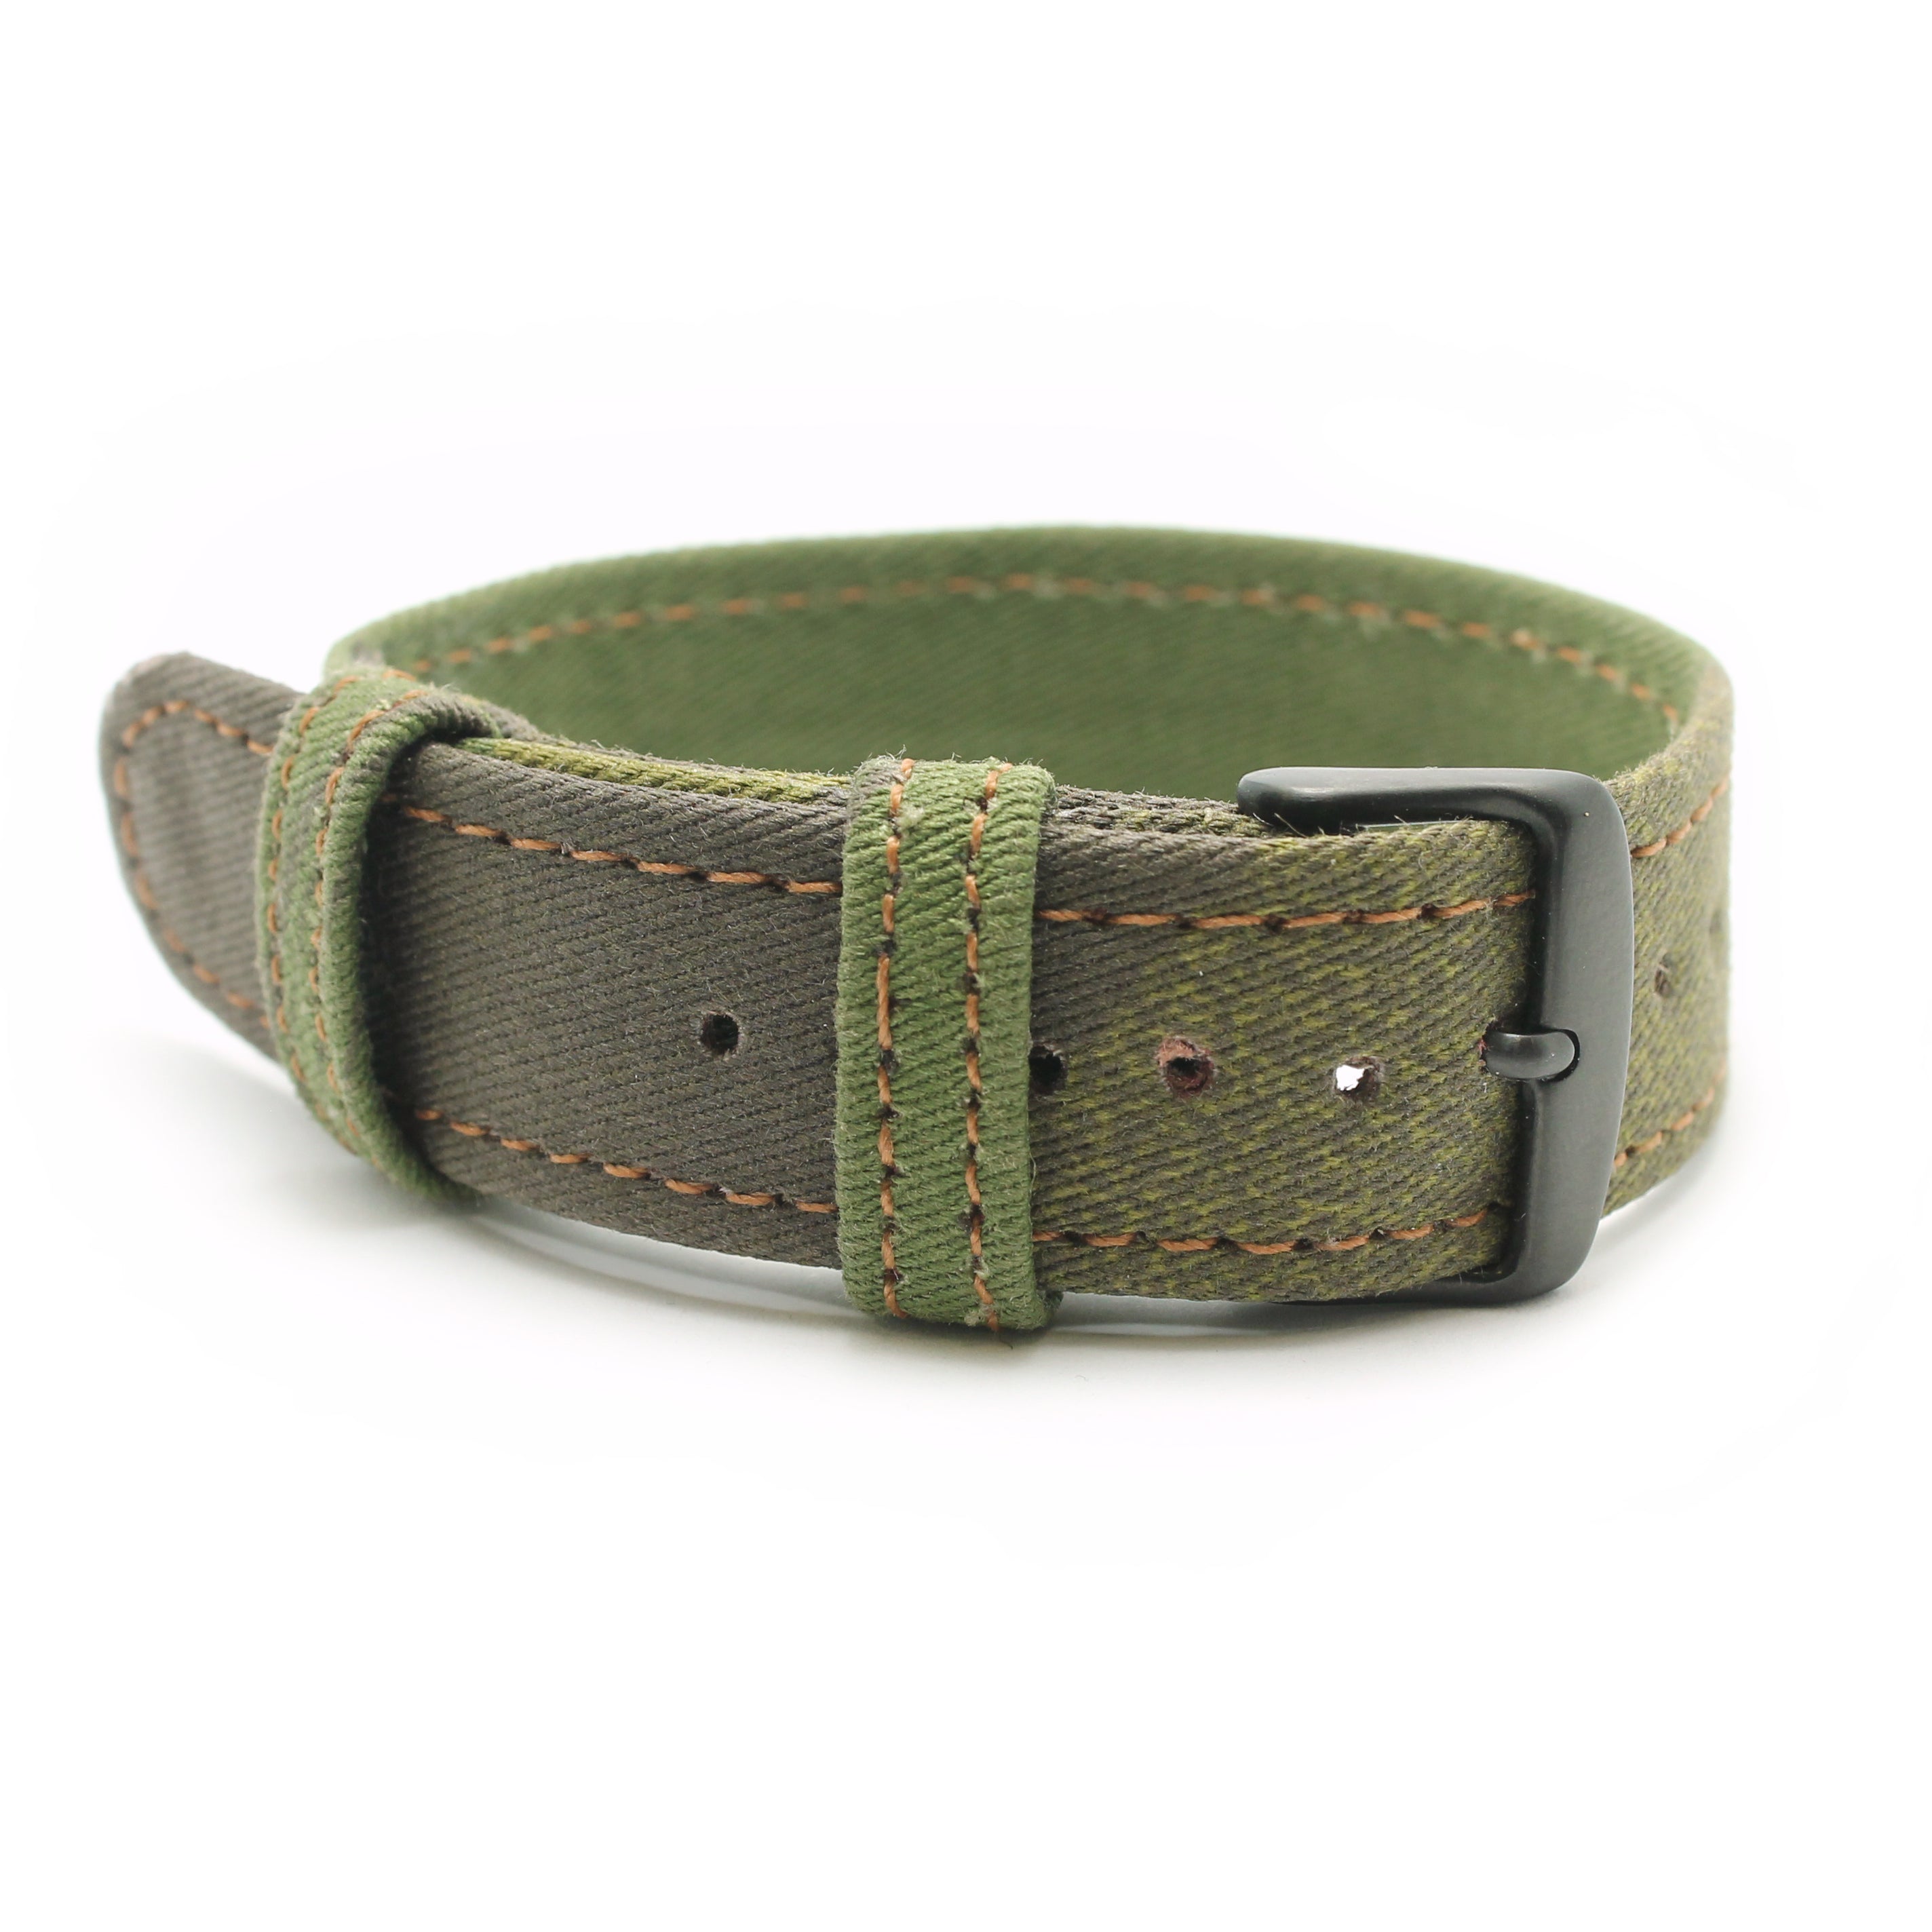 HAND-MADE CAMMO NATO STRAP - SAS WITH BLACK BUCKLE